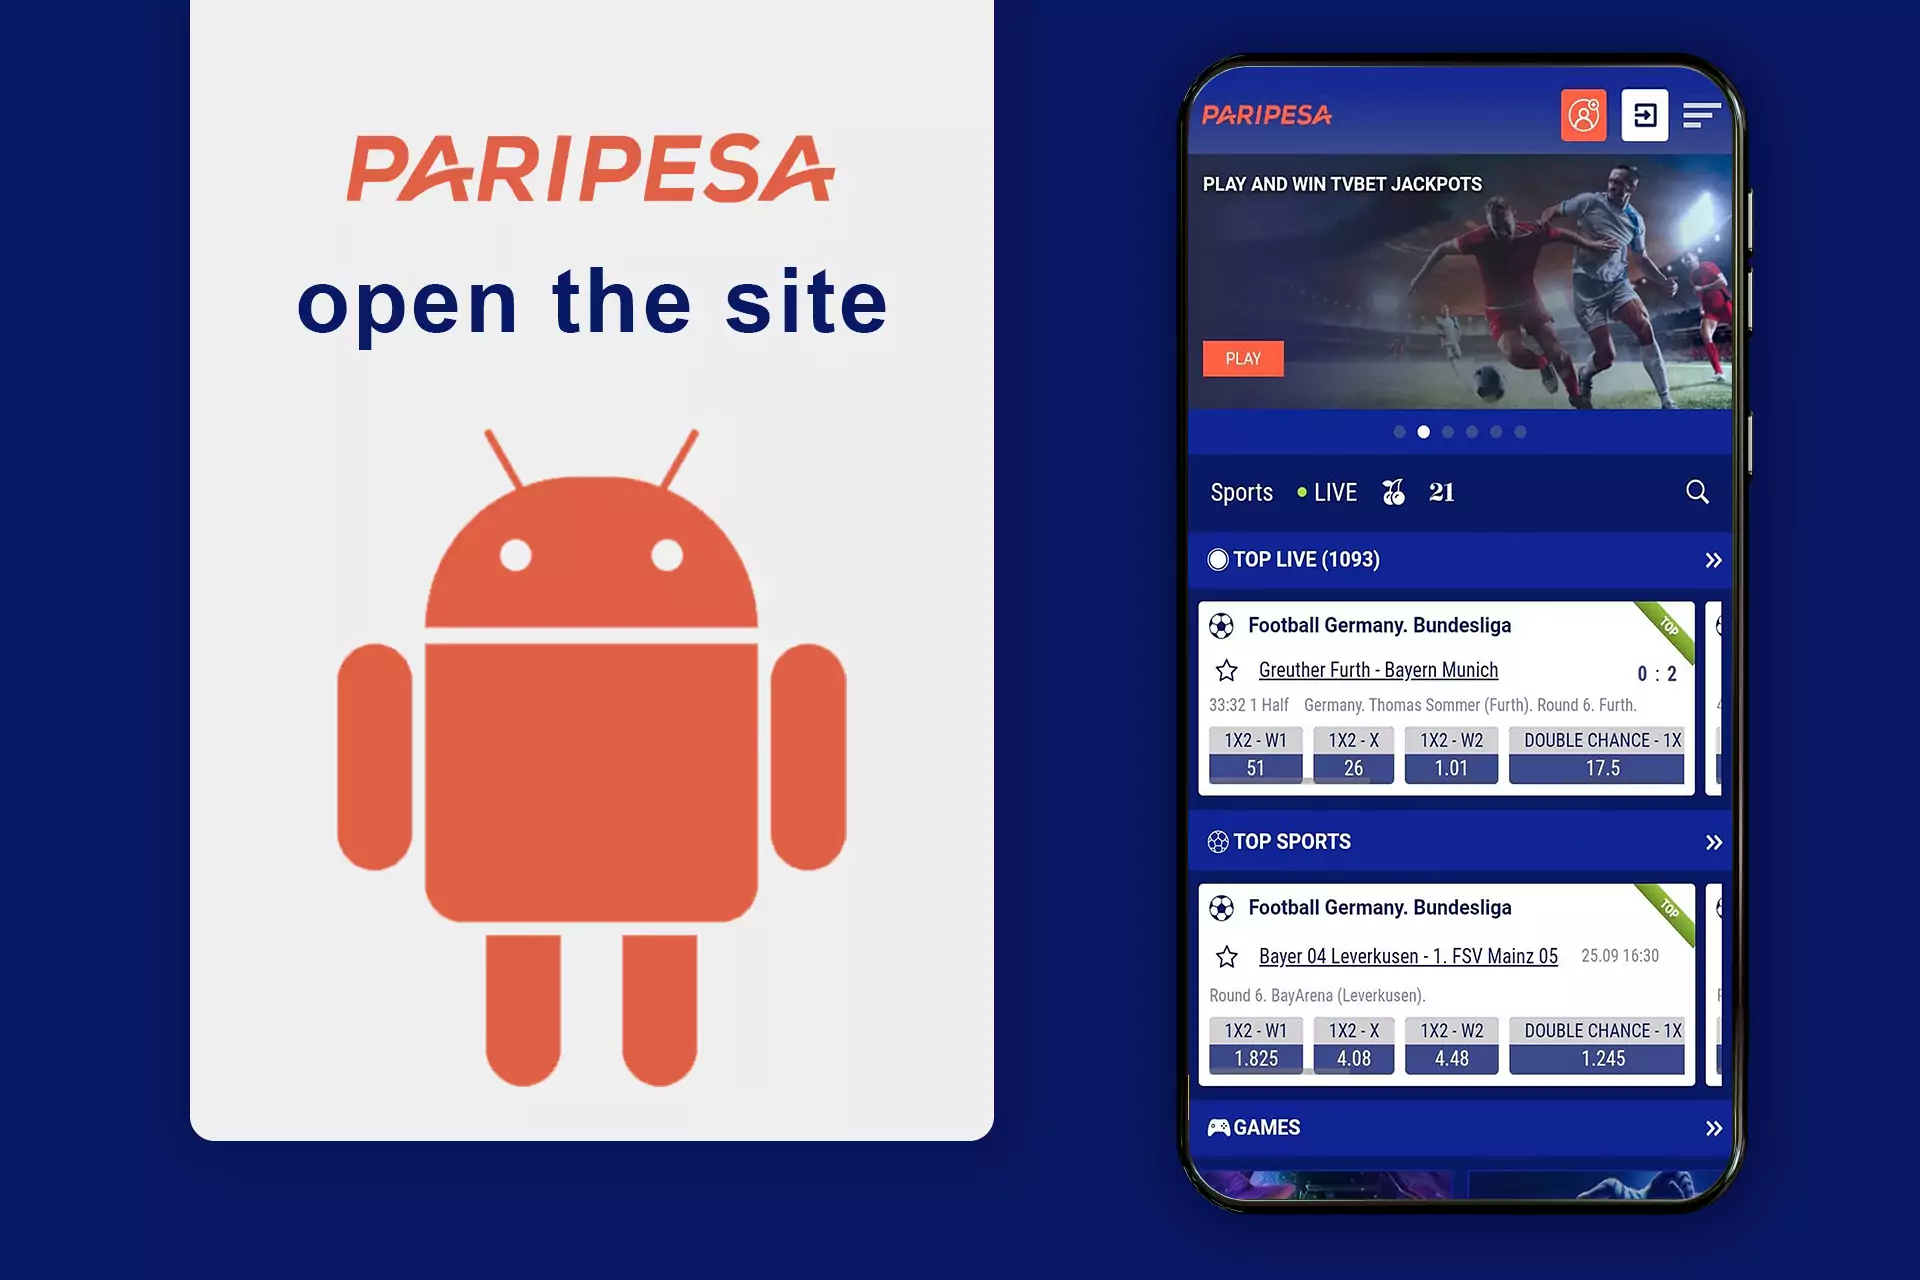 Go to the site of PariPesa in a browser.